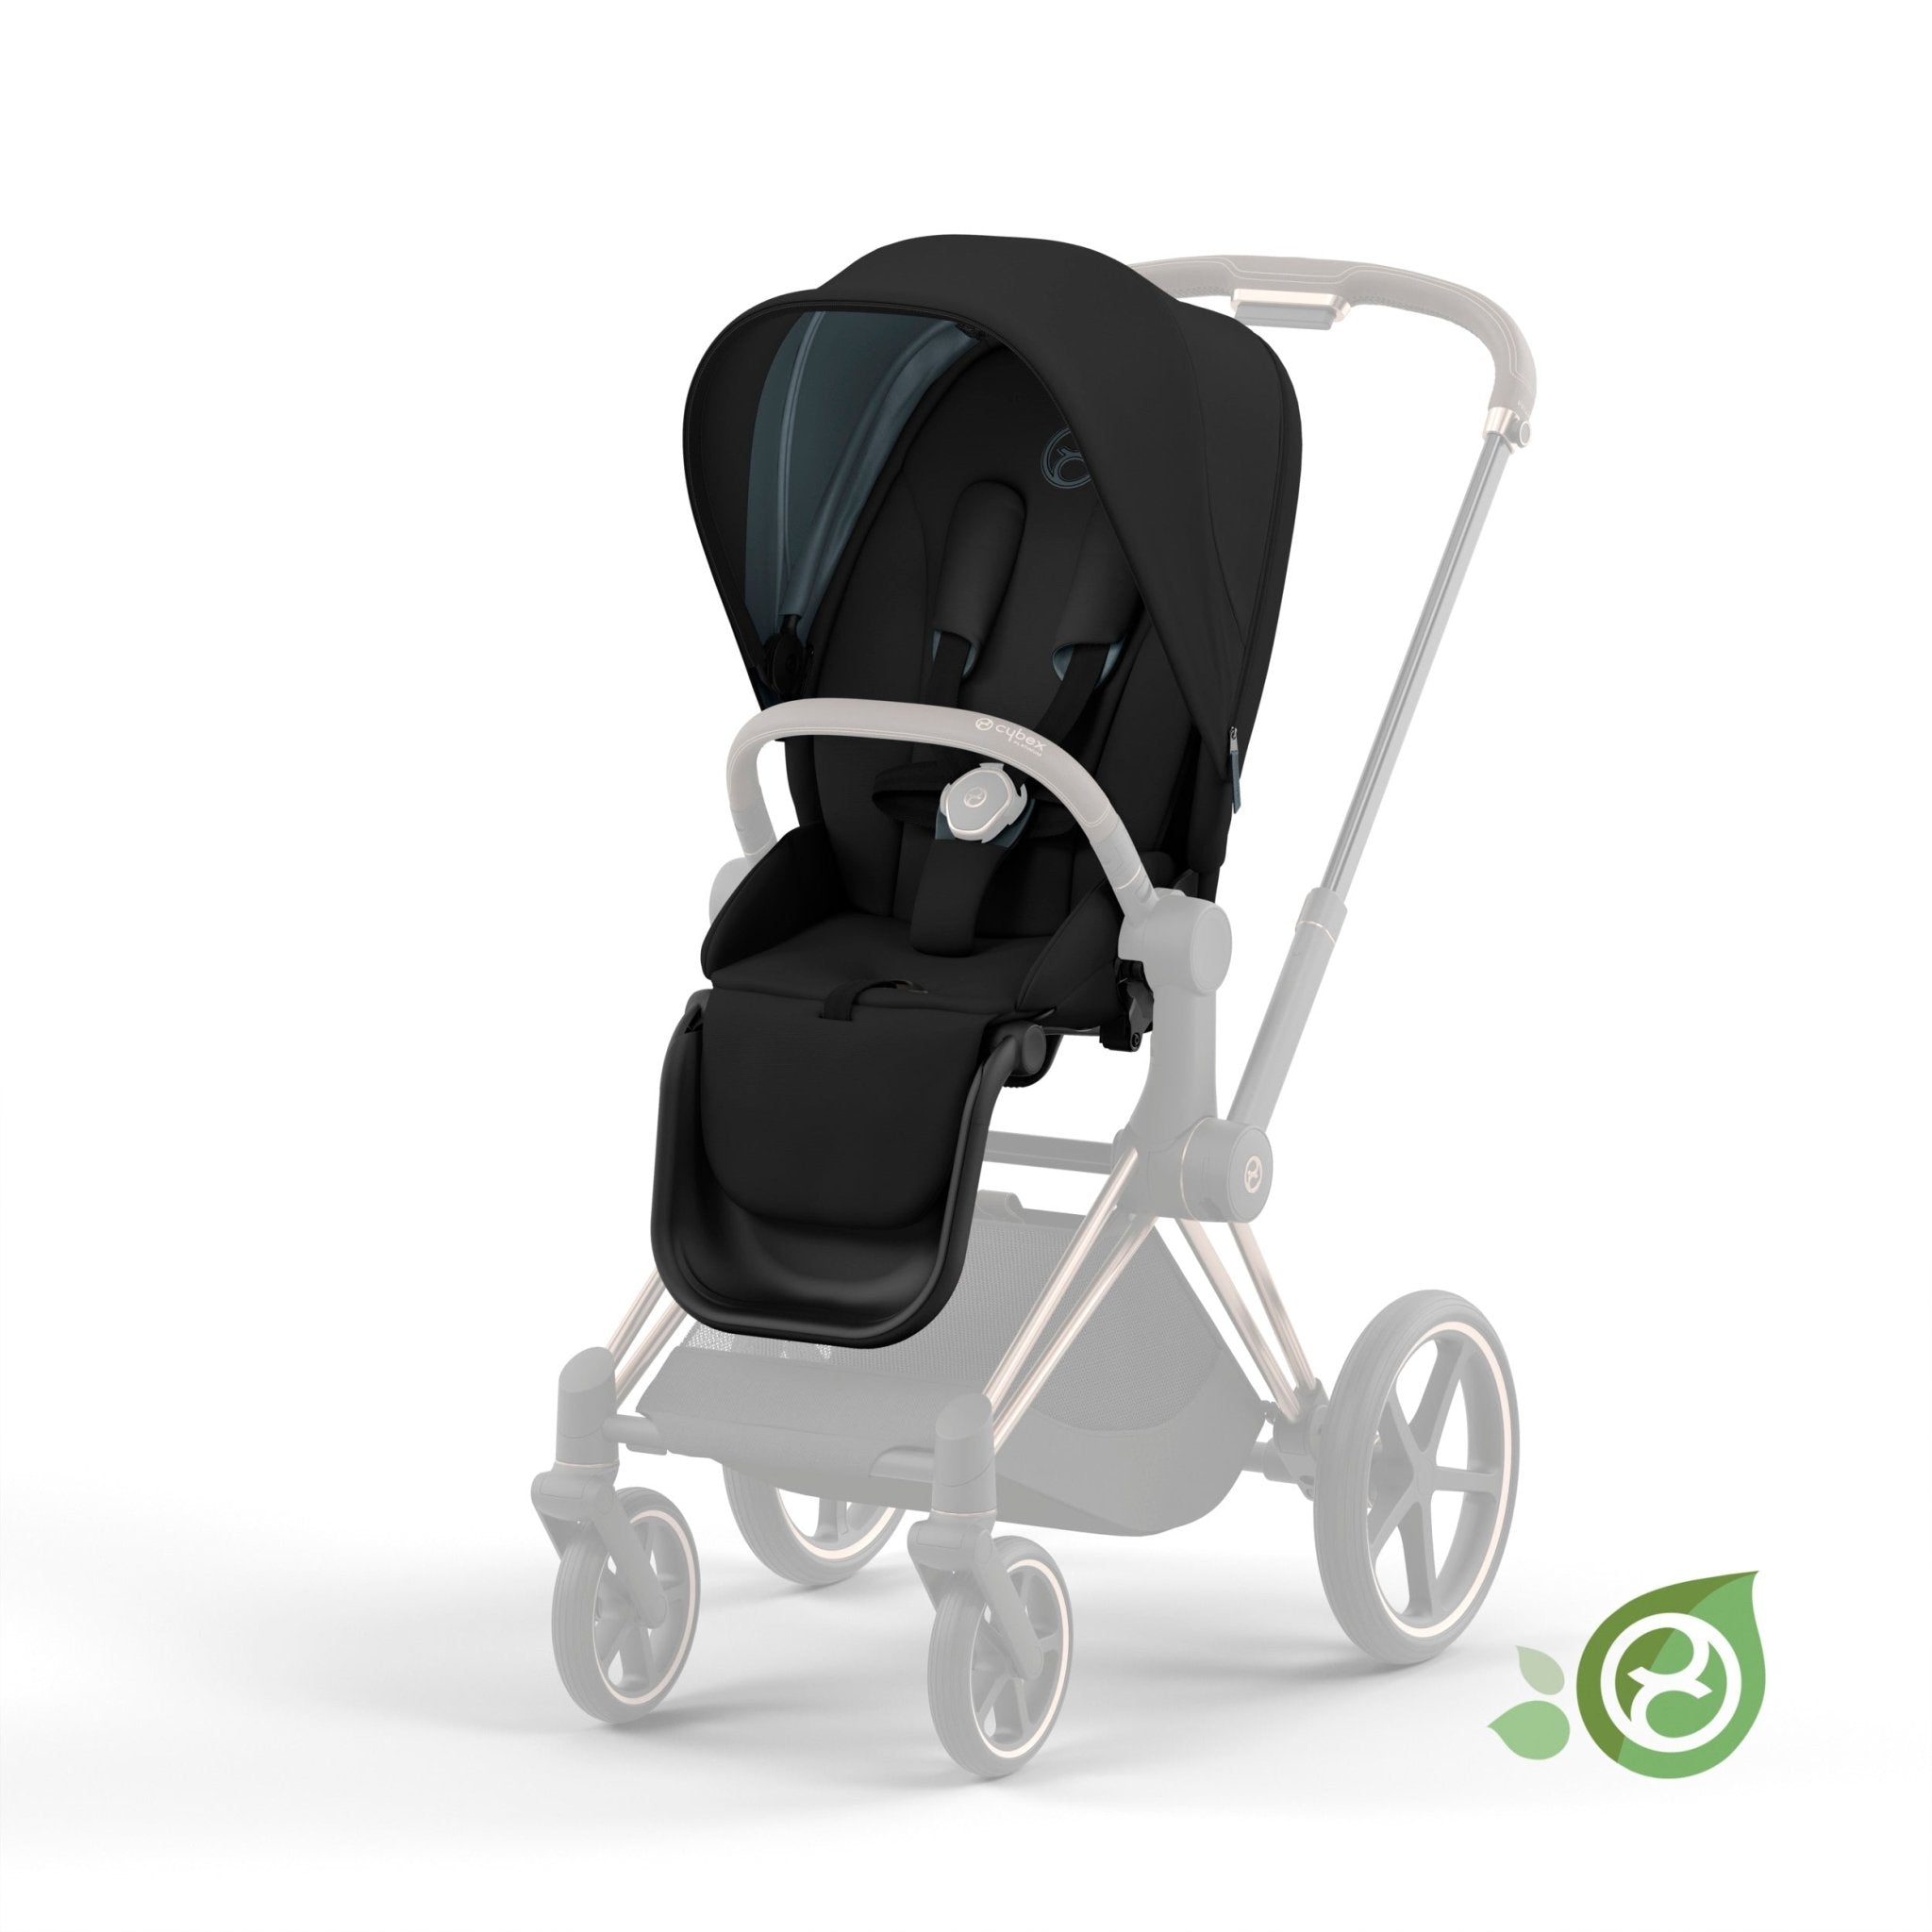 Cybex Priam4 / eP4 Seat Sustainable Fabric - ANB Baby -$100 - $300